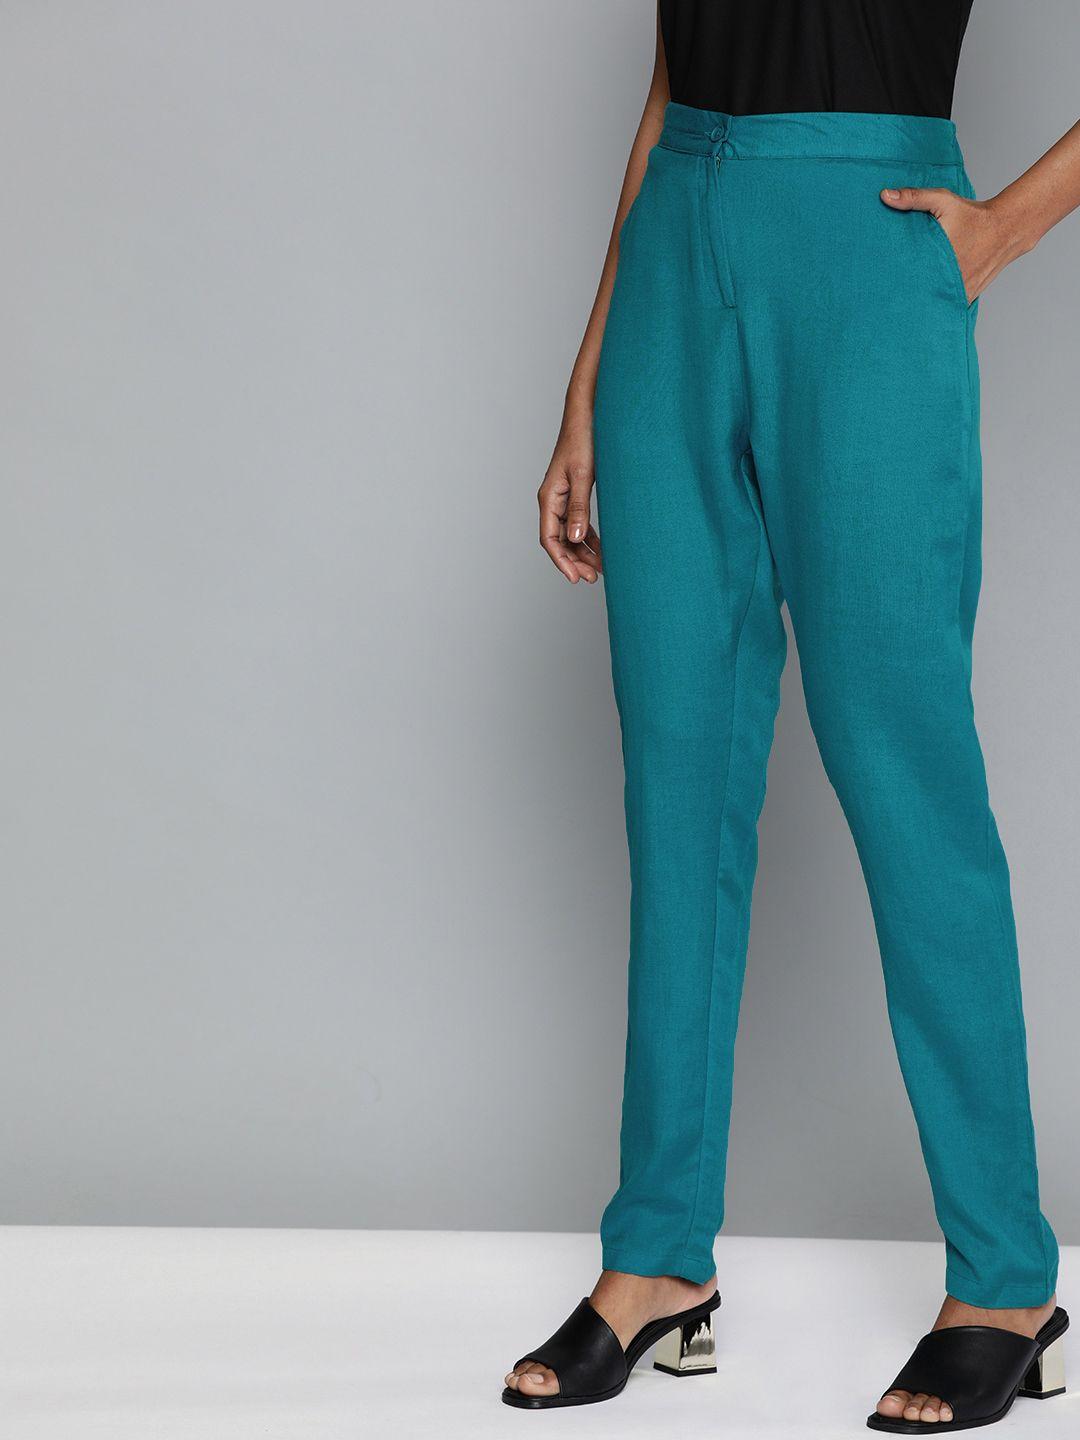 here&now women teal blue regular fit solid trousers